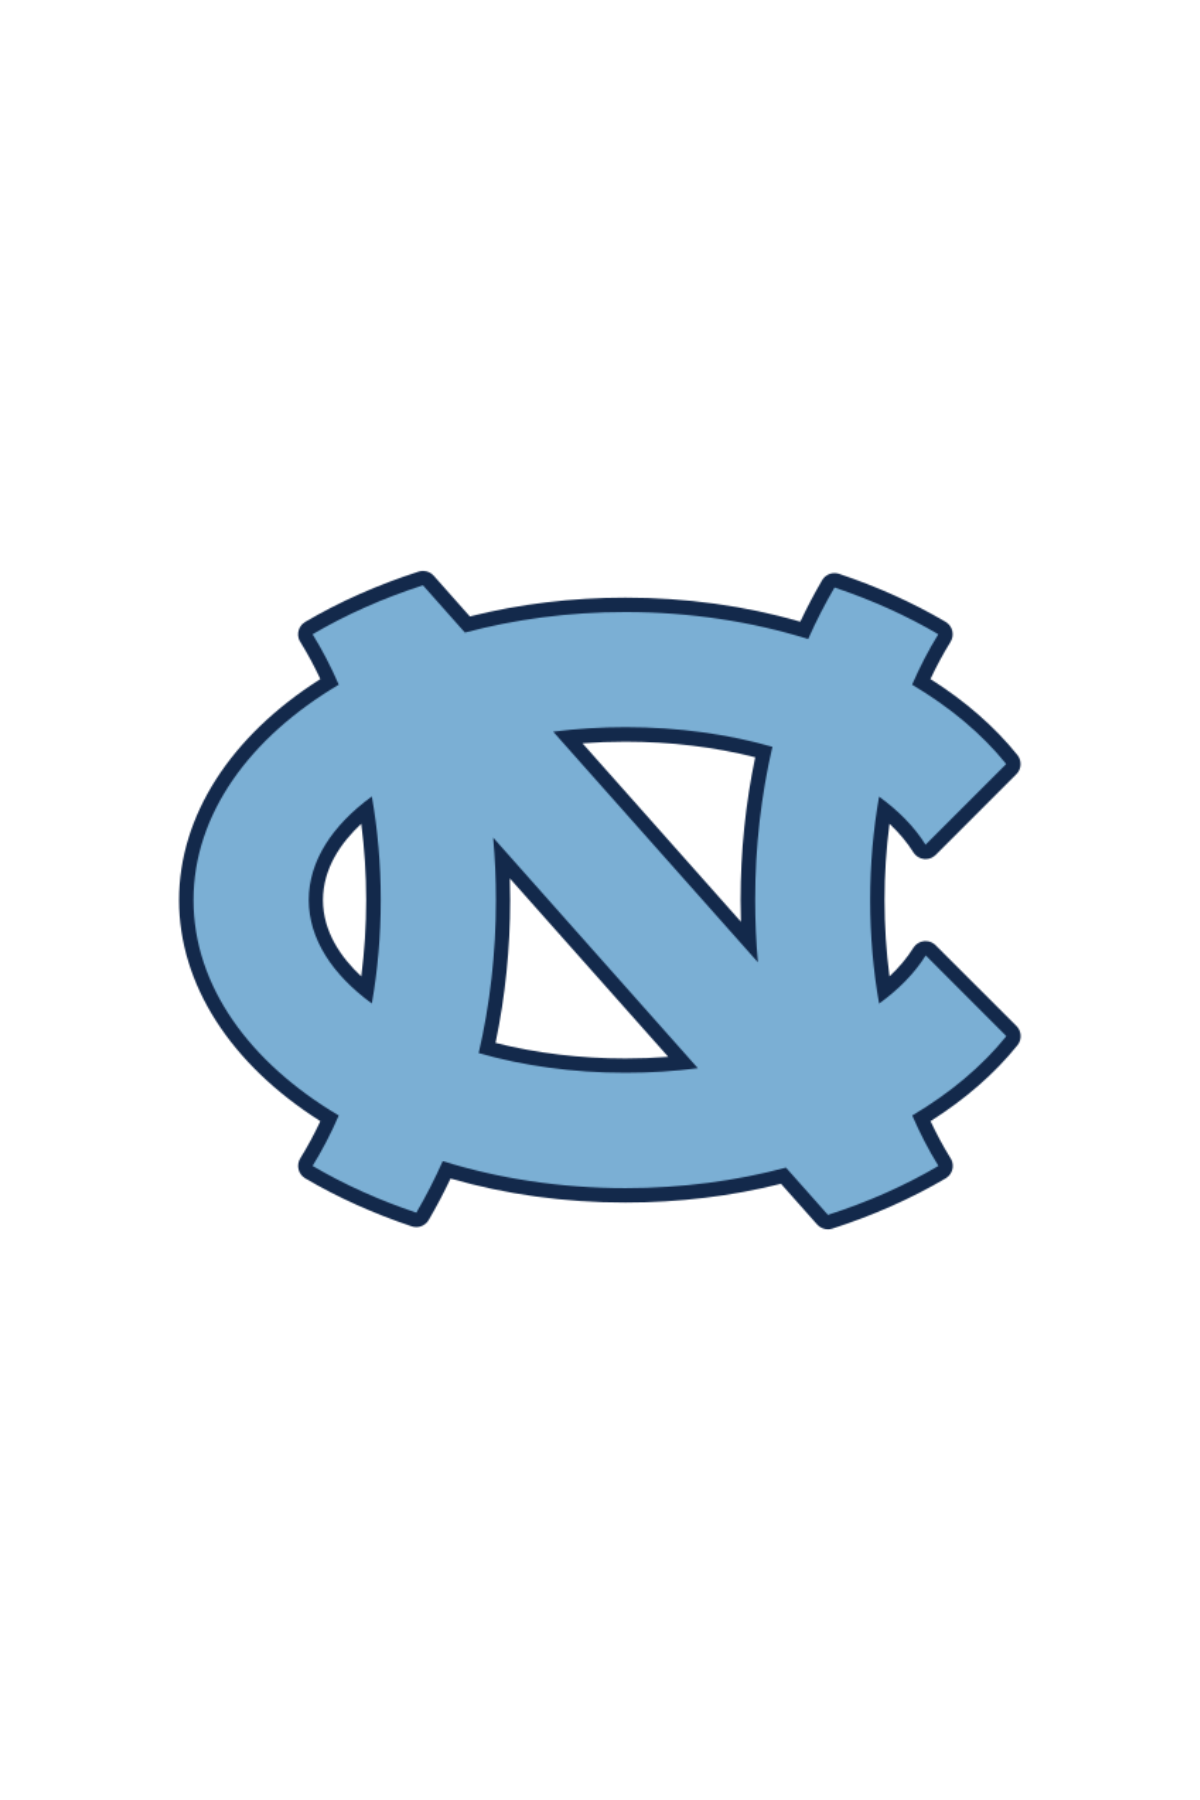 Brock Pope – The UNC NIL Store